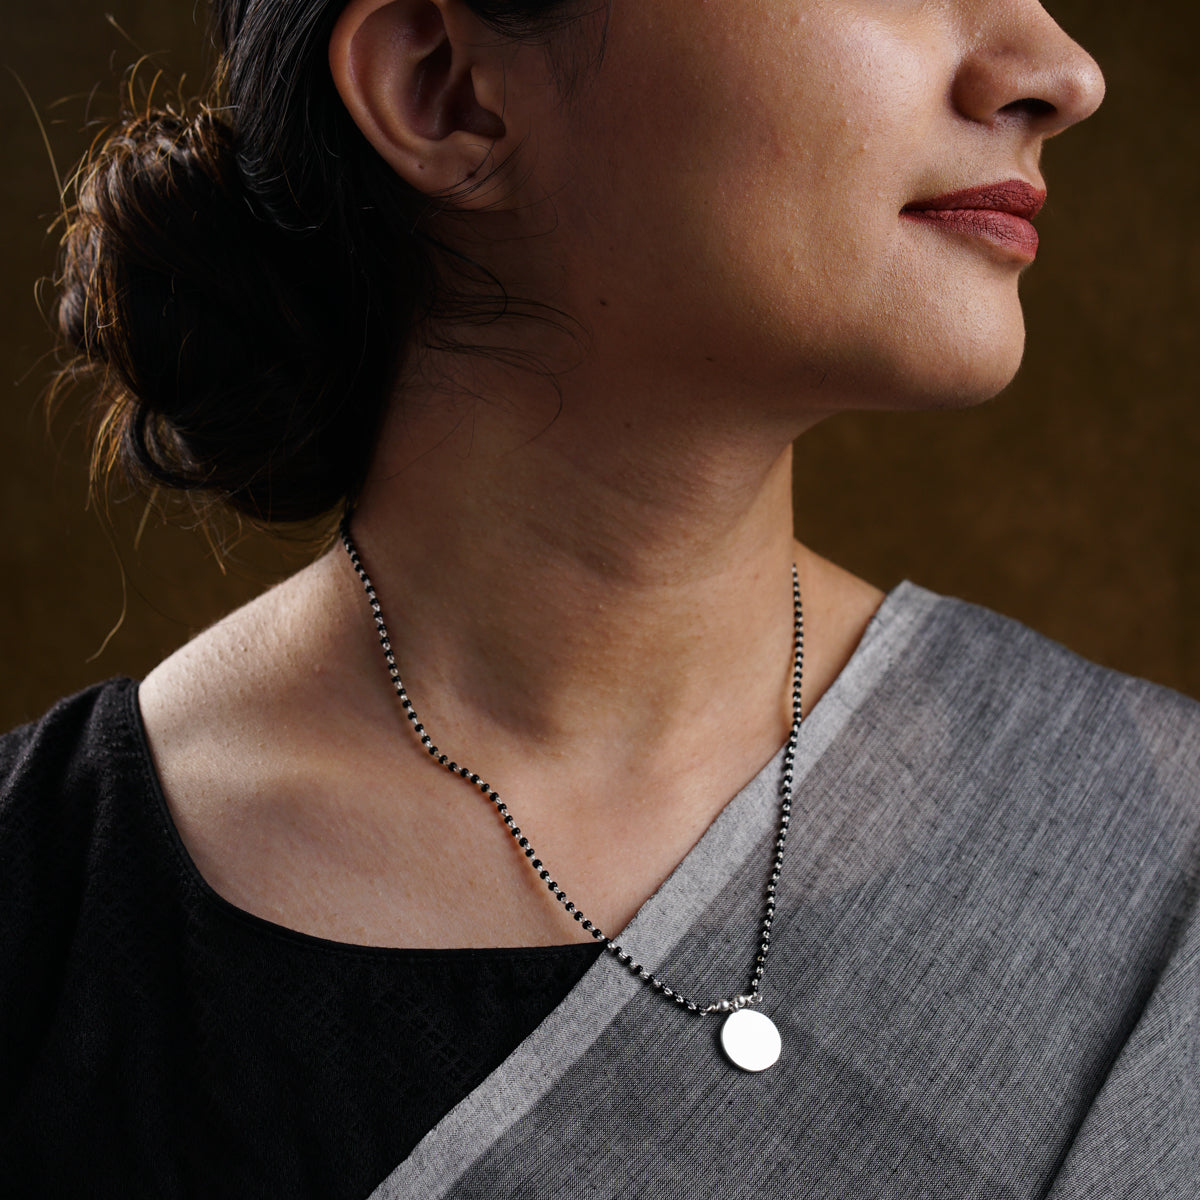 a woman wearing a necklace with a disc on it